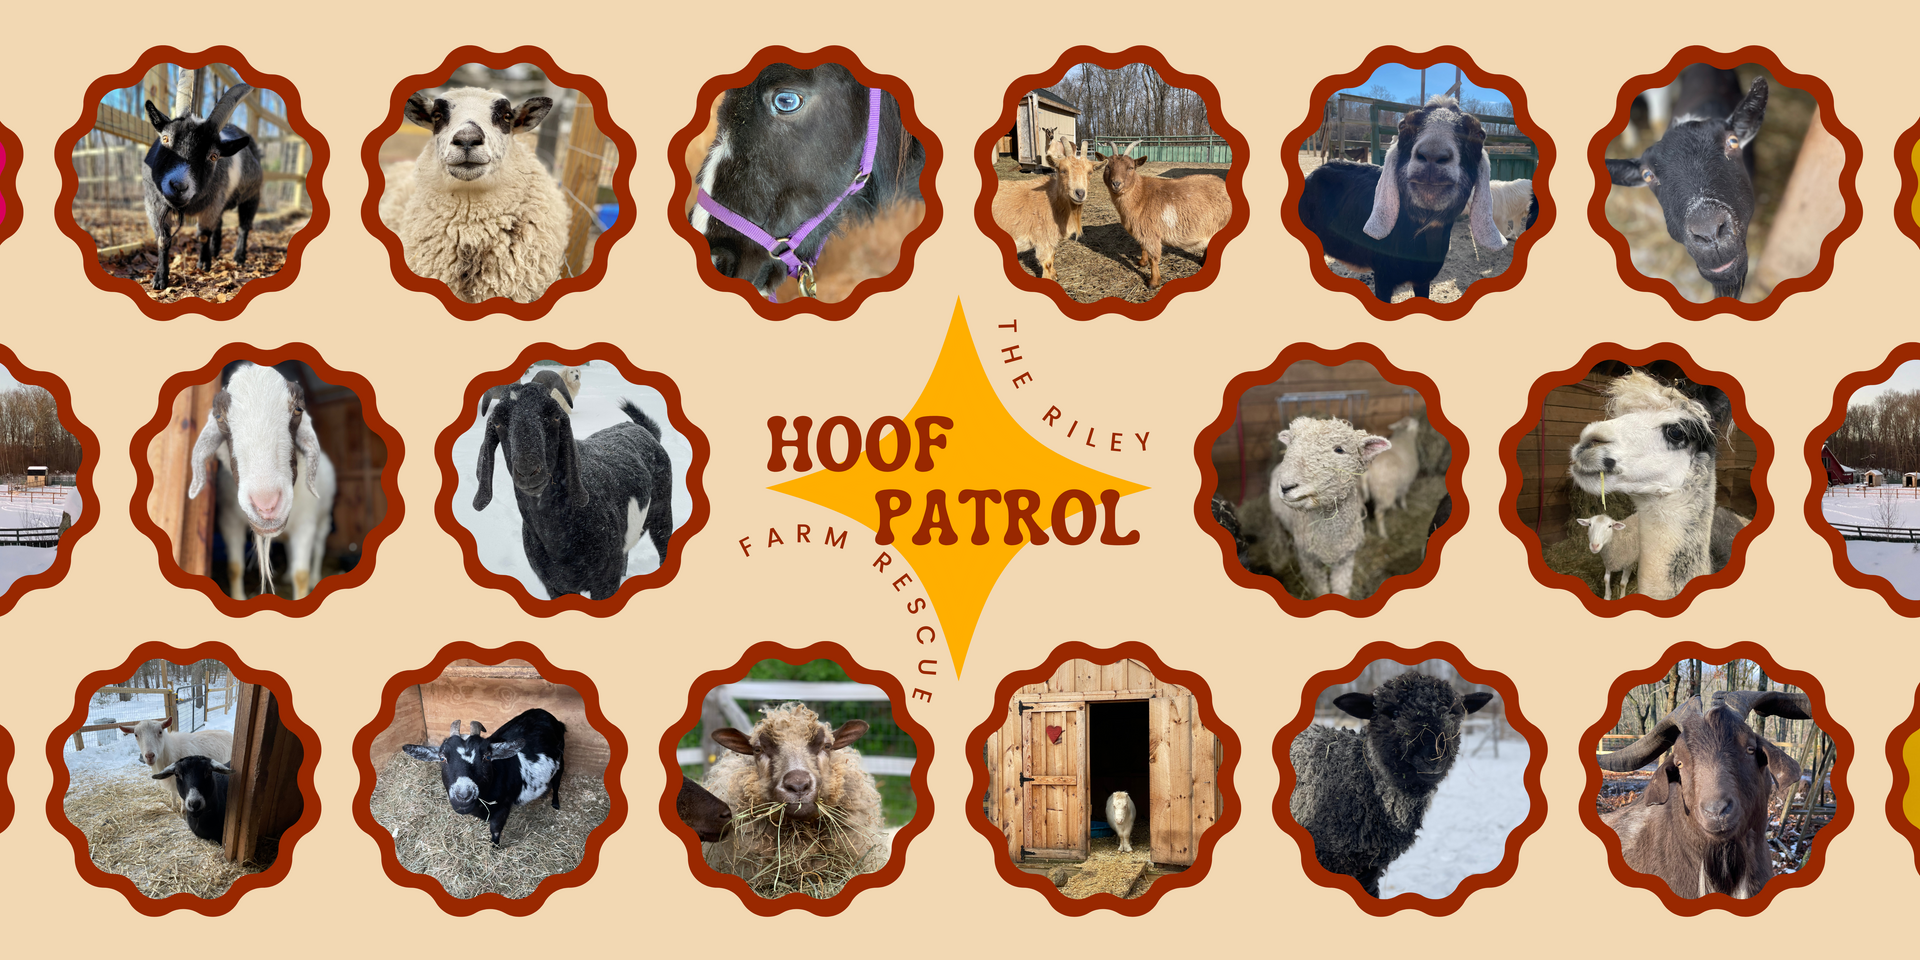 Super excited to launch our new Hoof Patrol Patreon program!